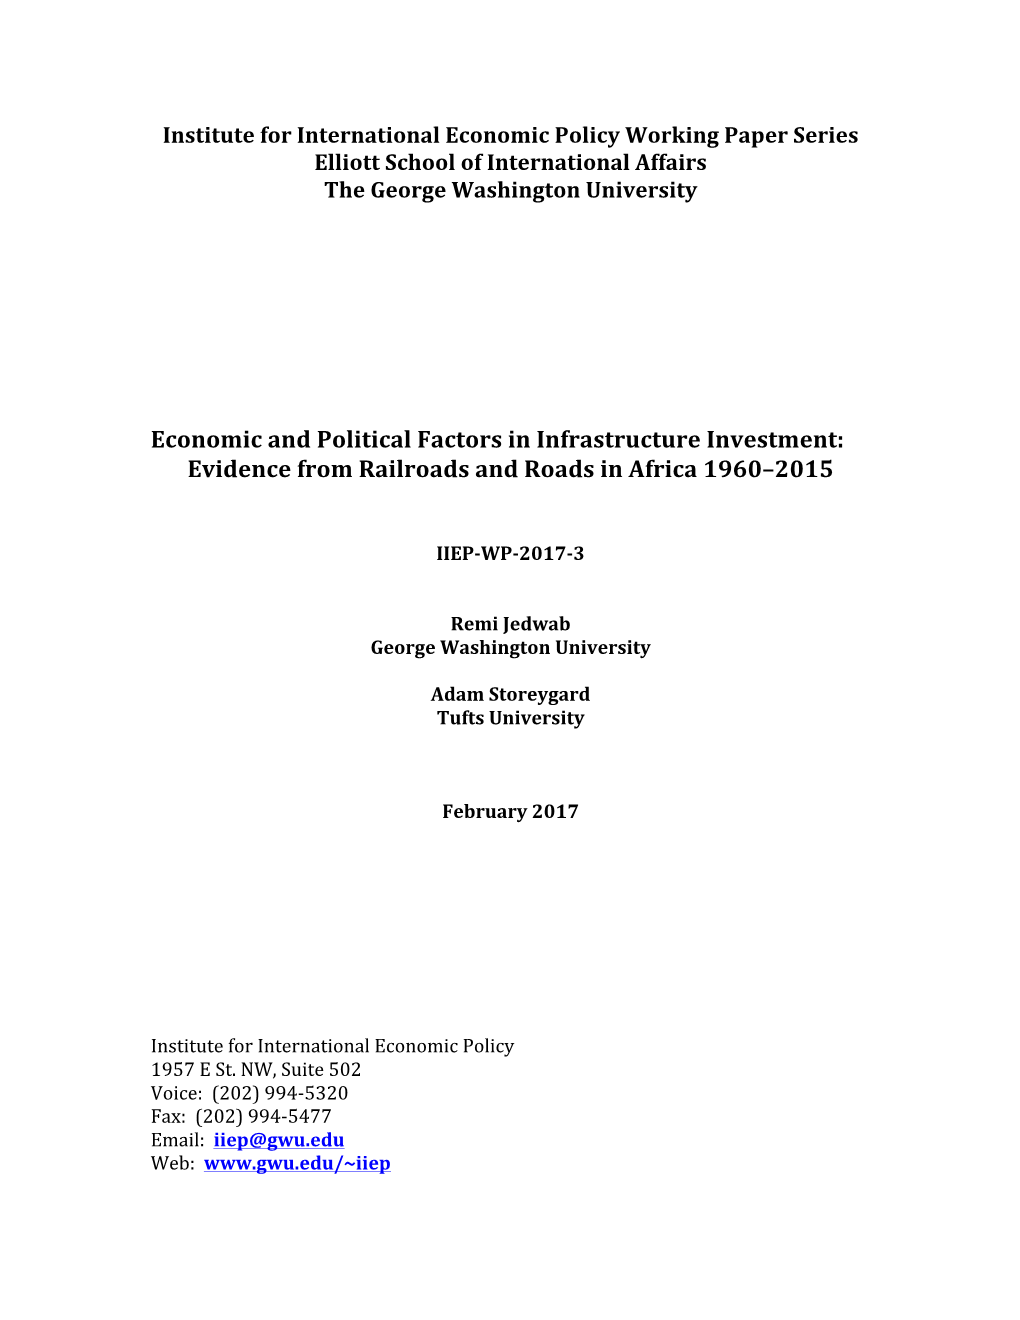 Economic and Political Factors in Infrastructure Investment: Evidence from Railroads and Roads in Africa 1960–2015